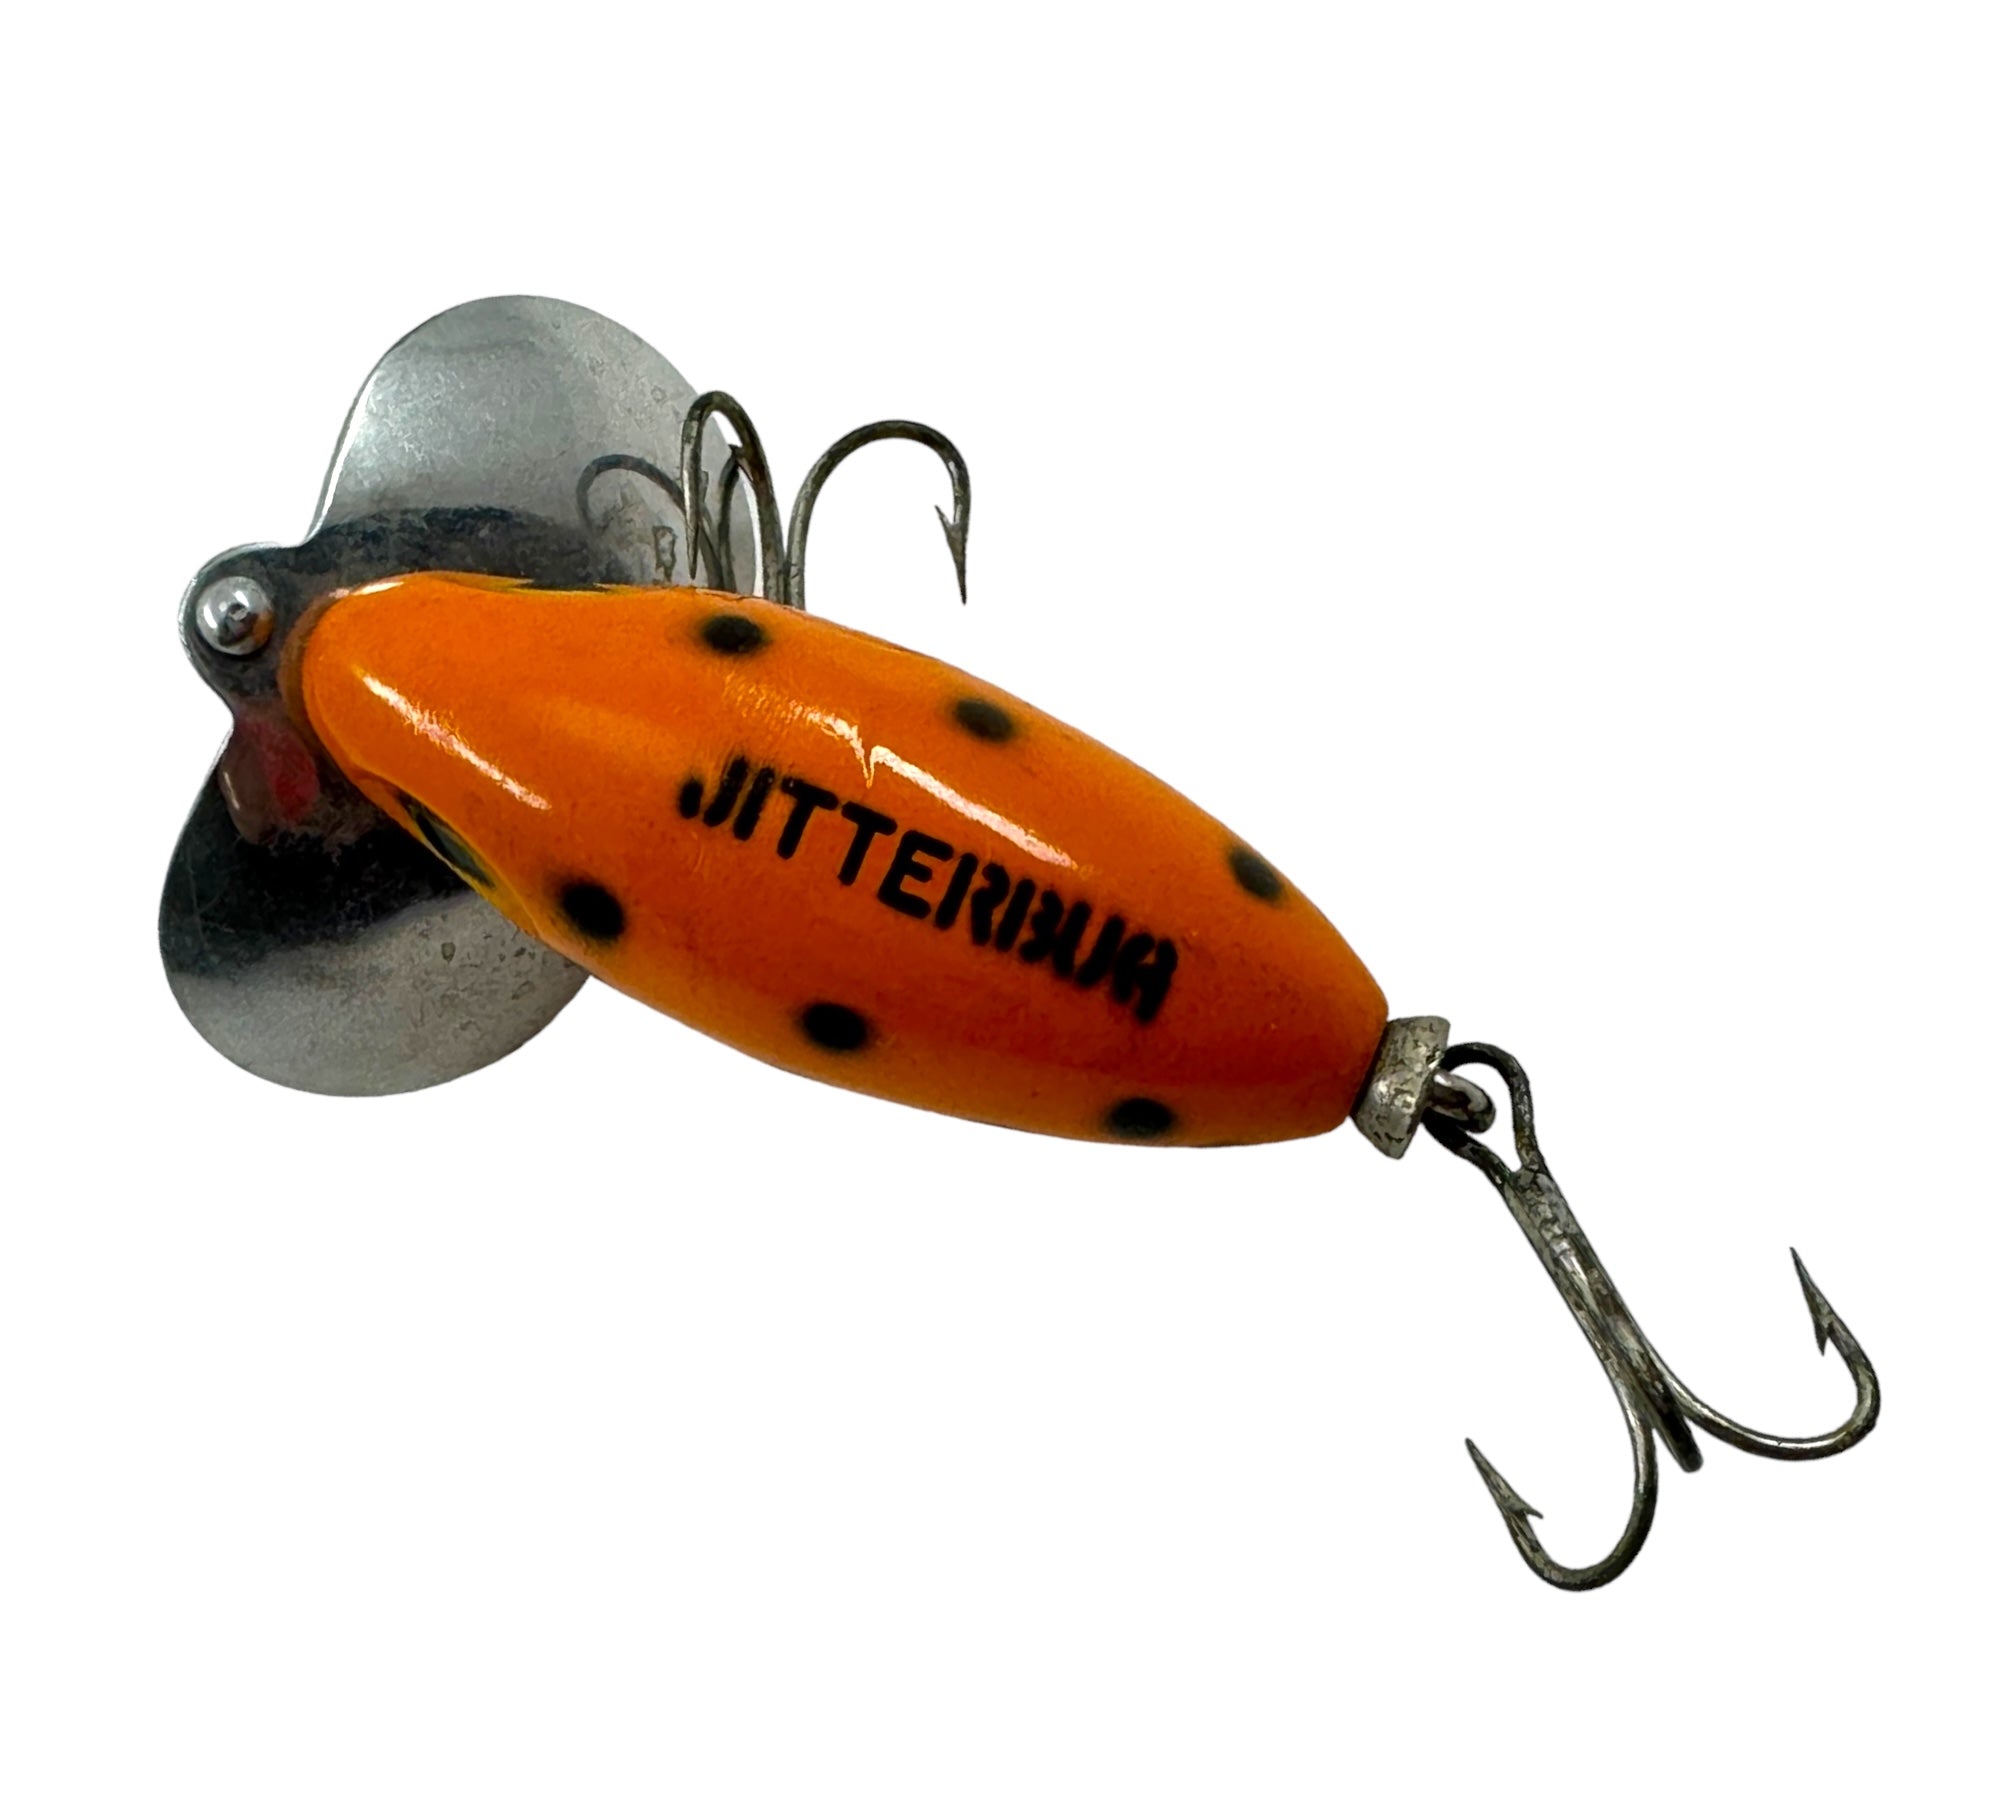 Arbogast Jitterbug 1/4 Oz Fishing Lure - White/red Head for sale